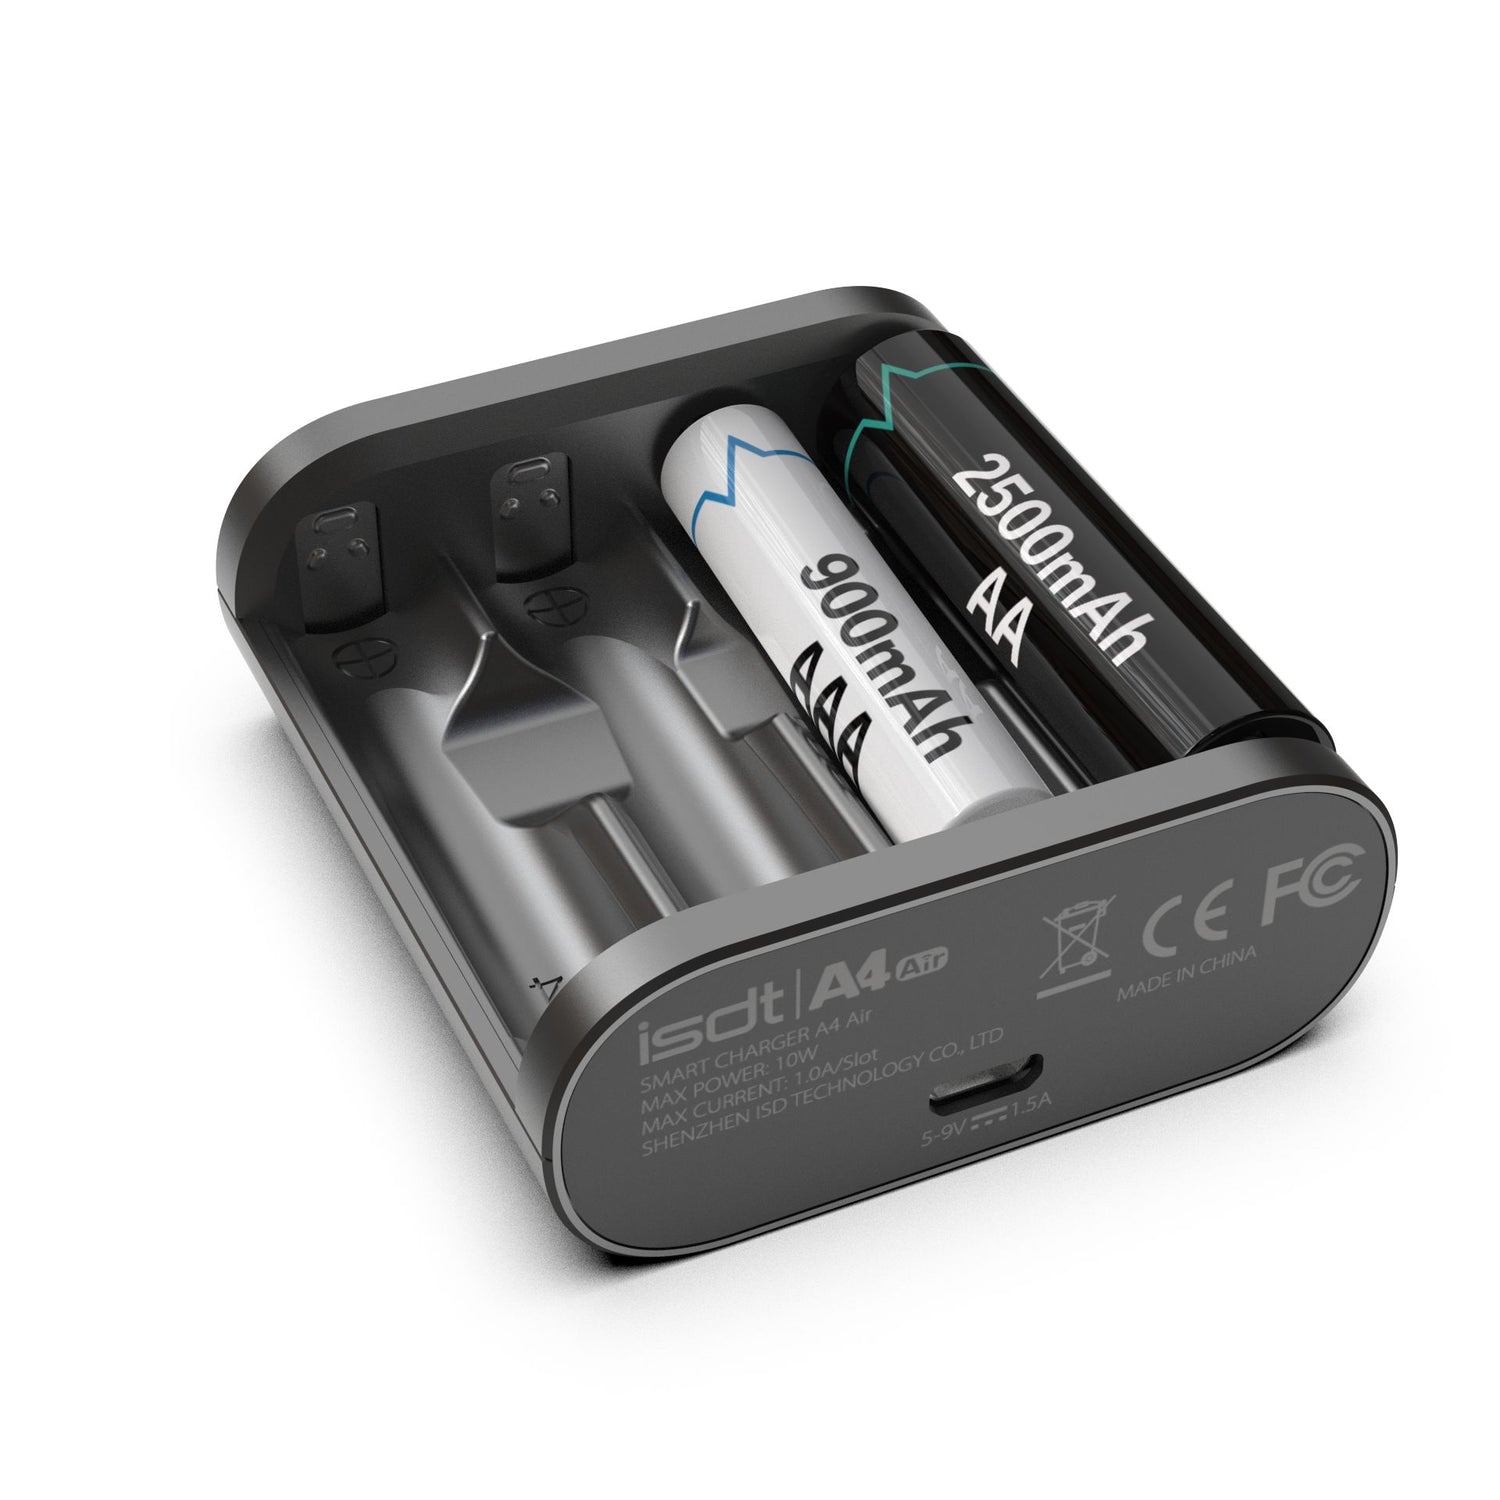 A4 Air Battery Charger,Smart AA/AAA Battery Charger with Bluetooth Connection Function ISDT